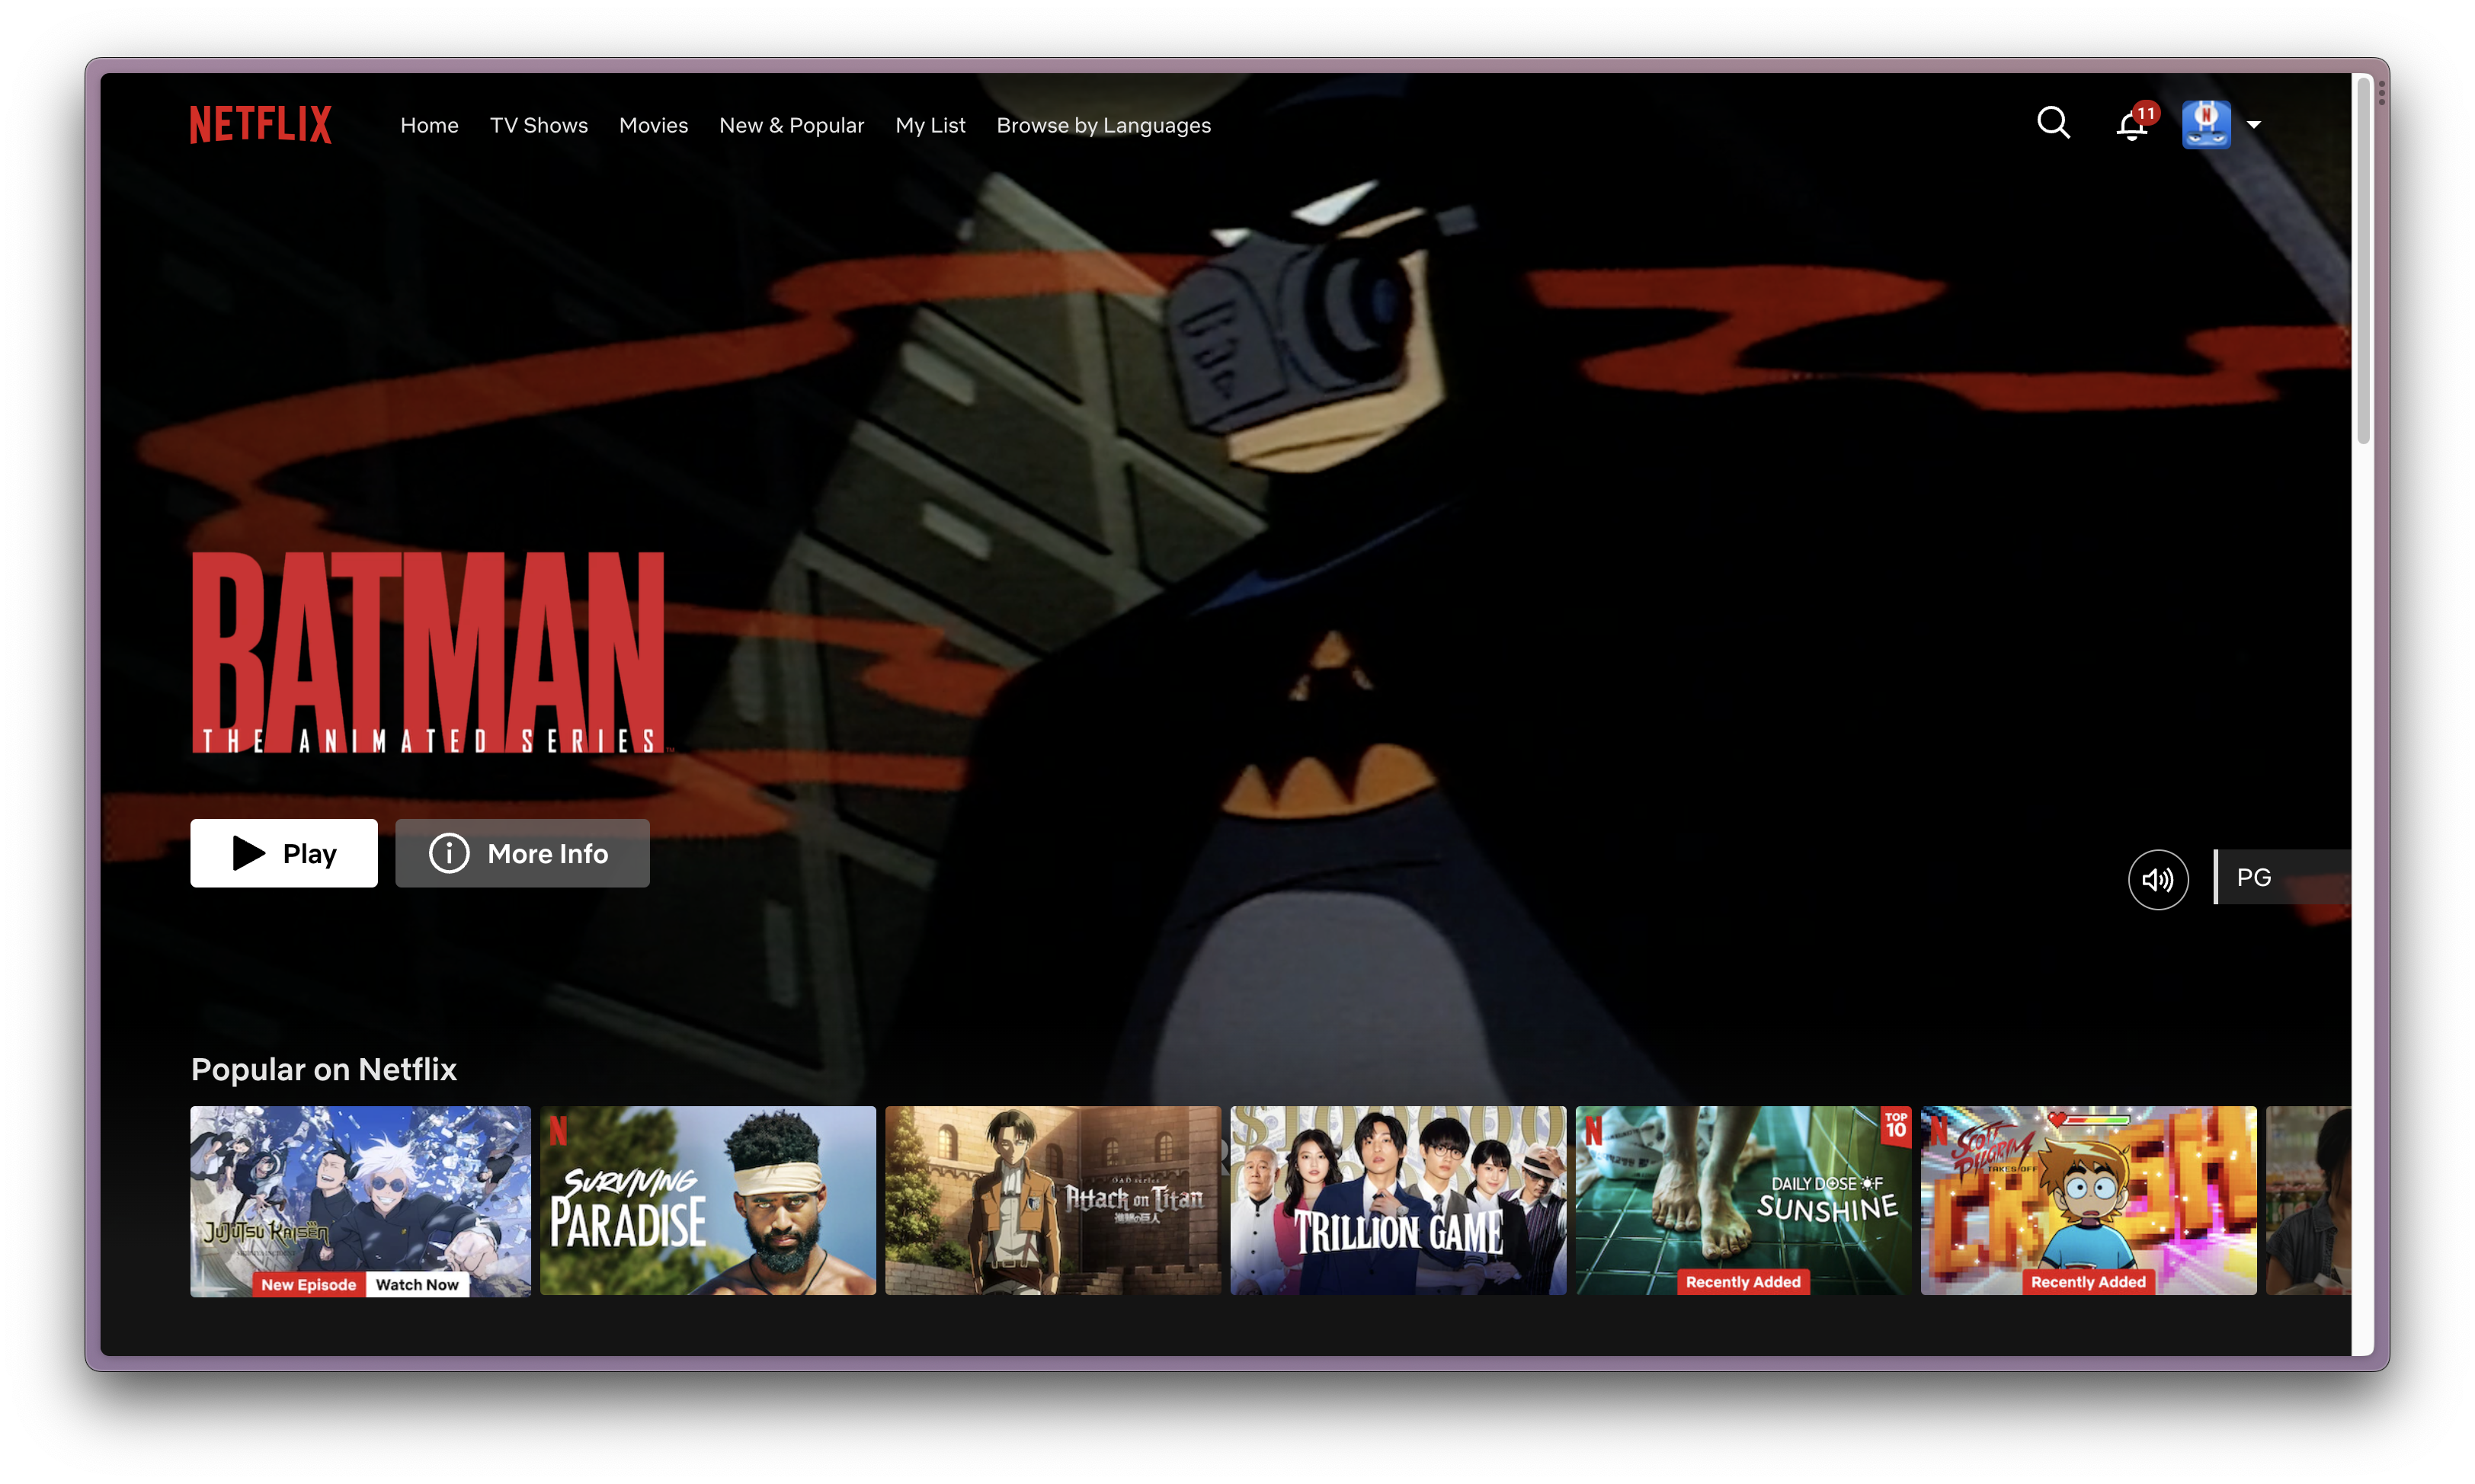 Netflix recommendations page